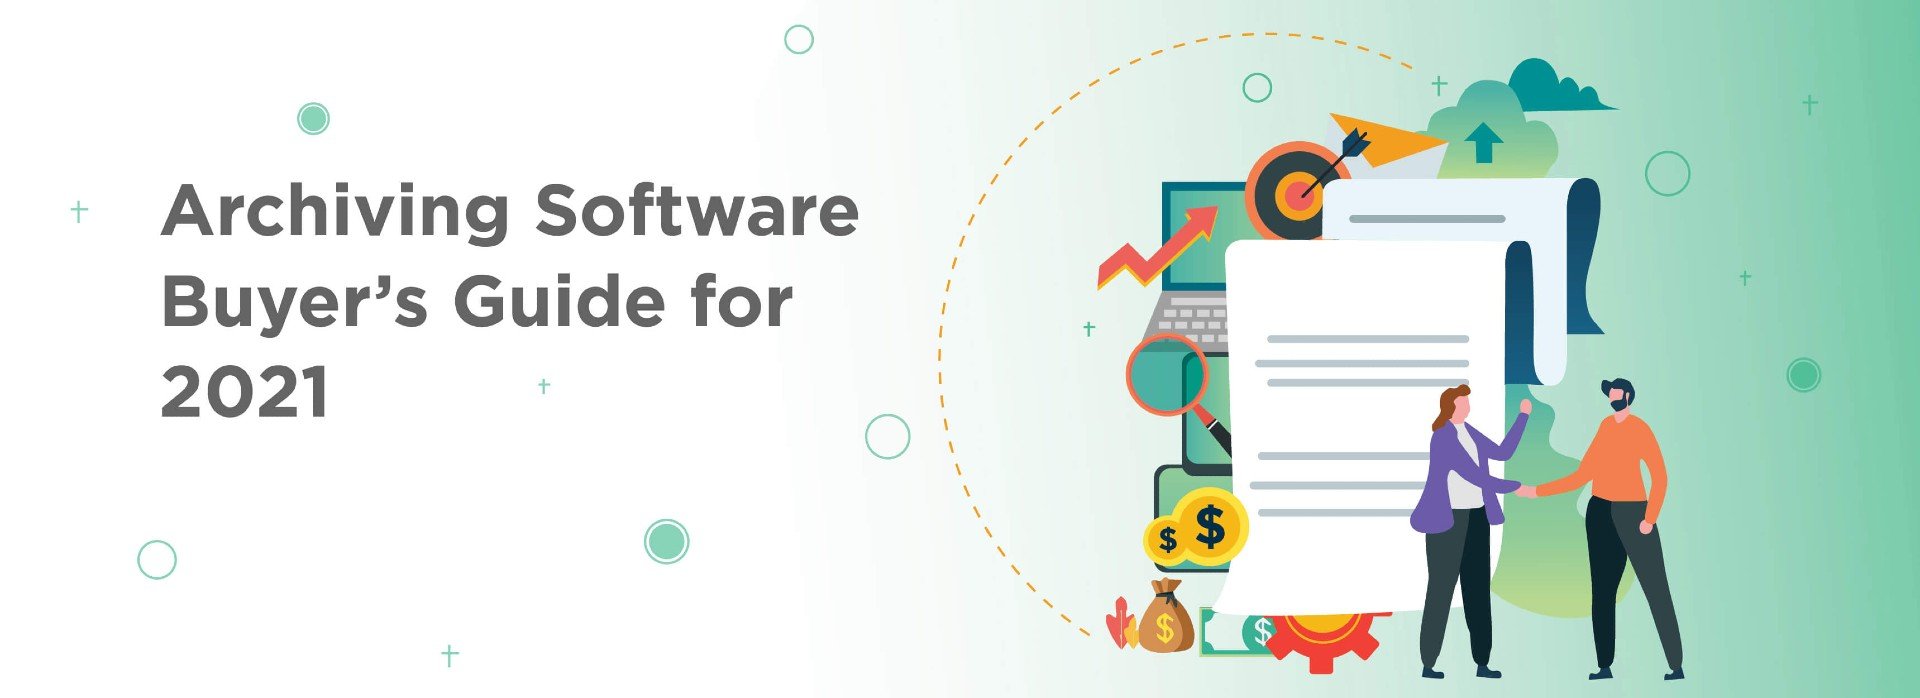 Archiving Software Buyer’s Guide for 2021